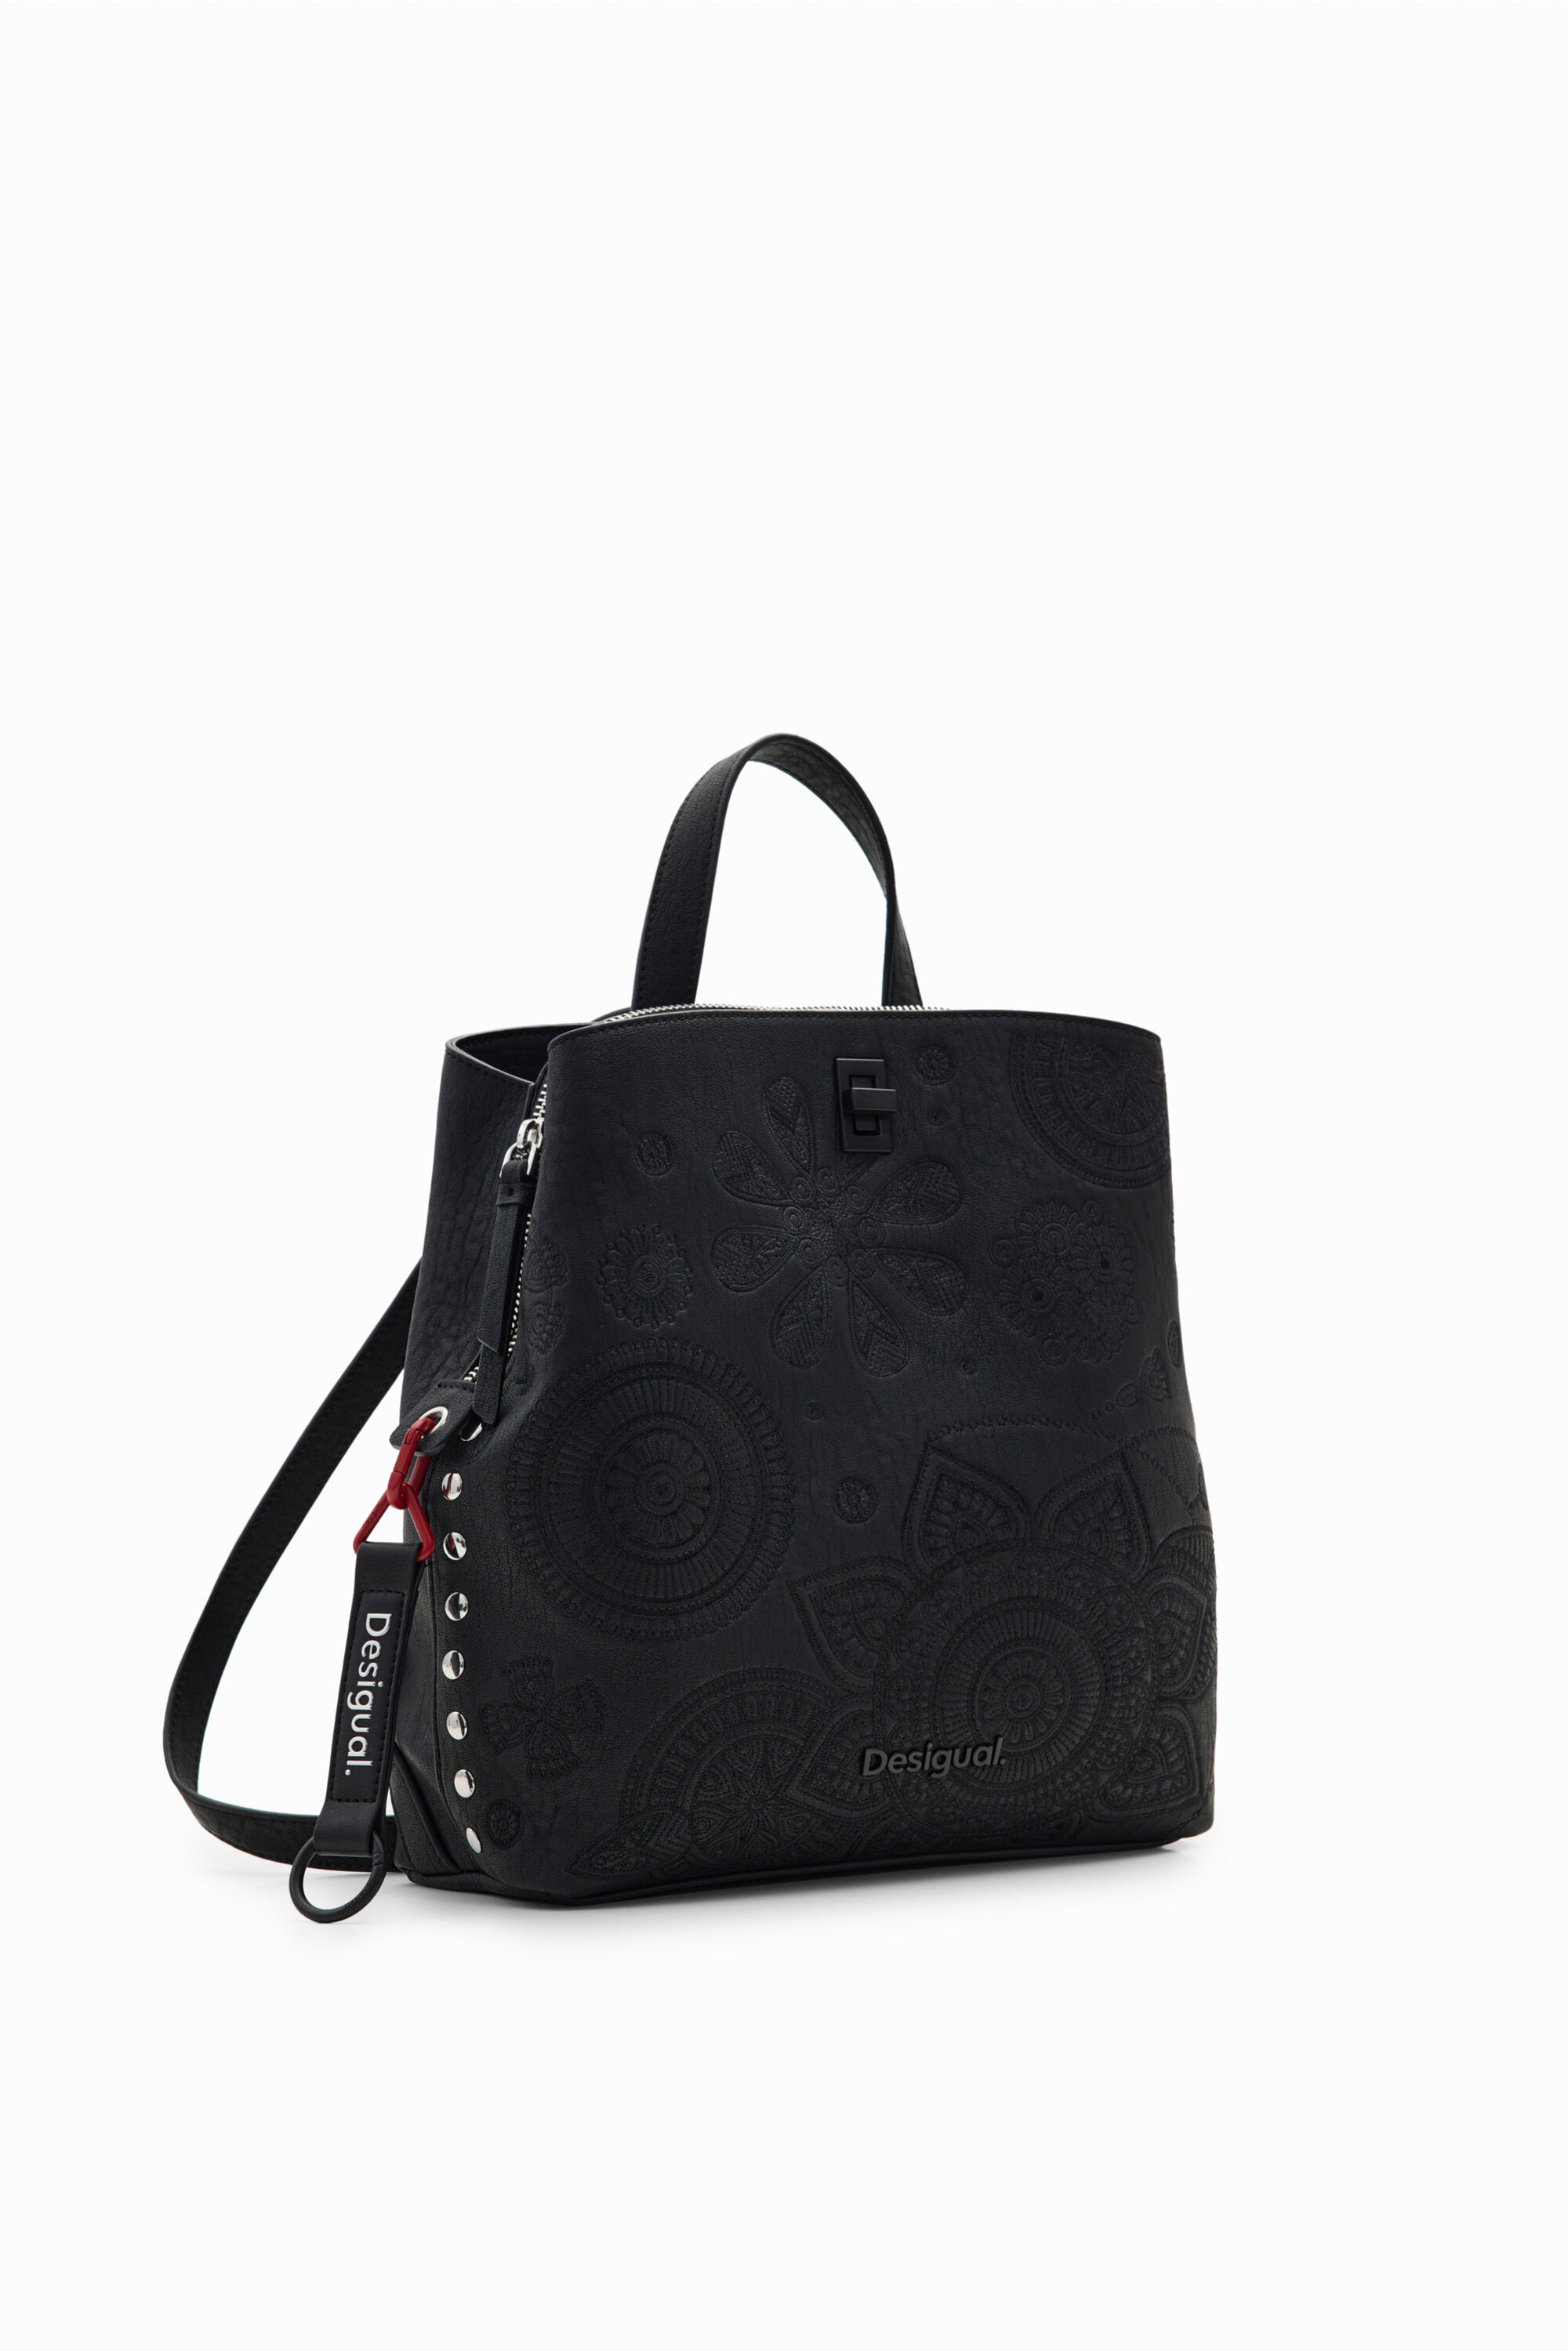 Desigual Small Embroidered Backpack In Black